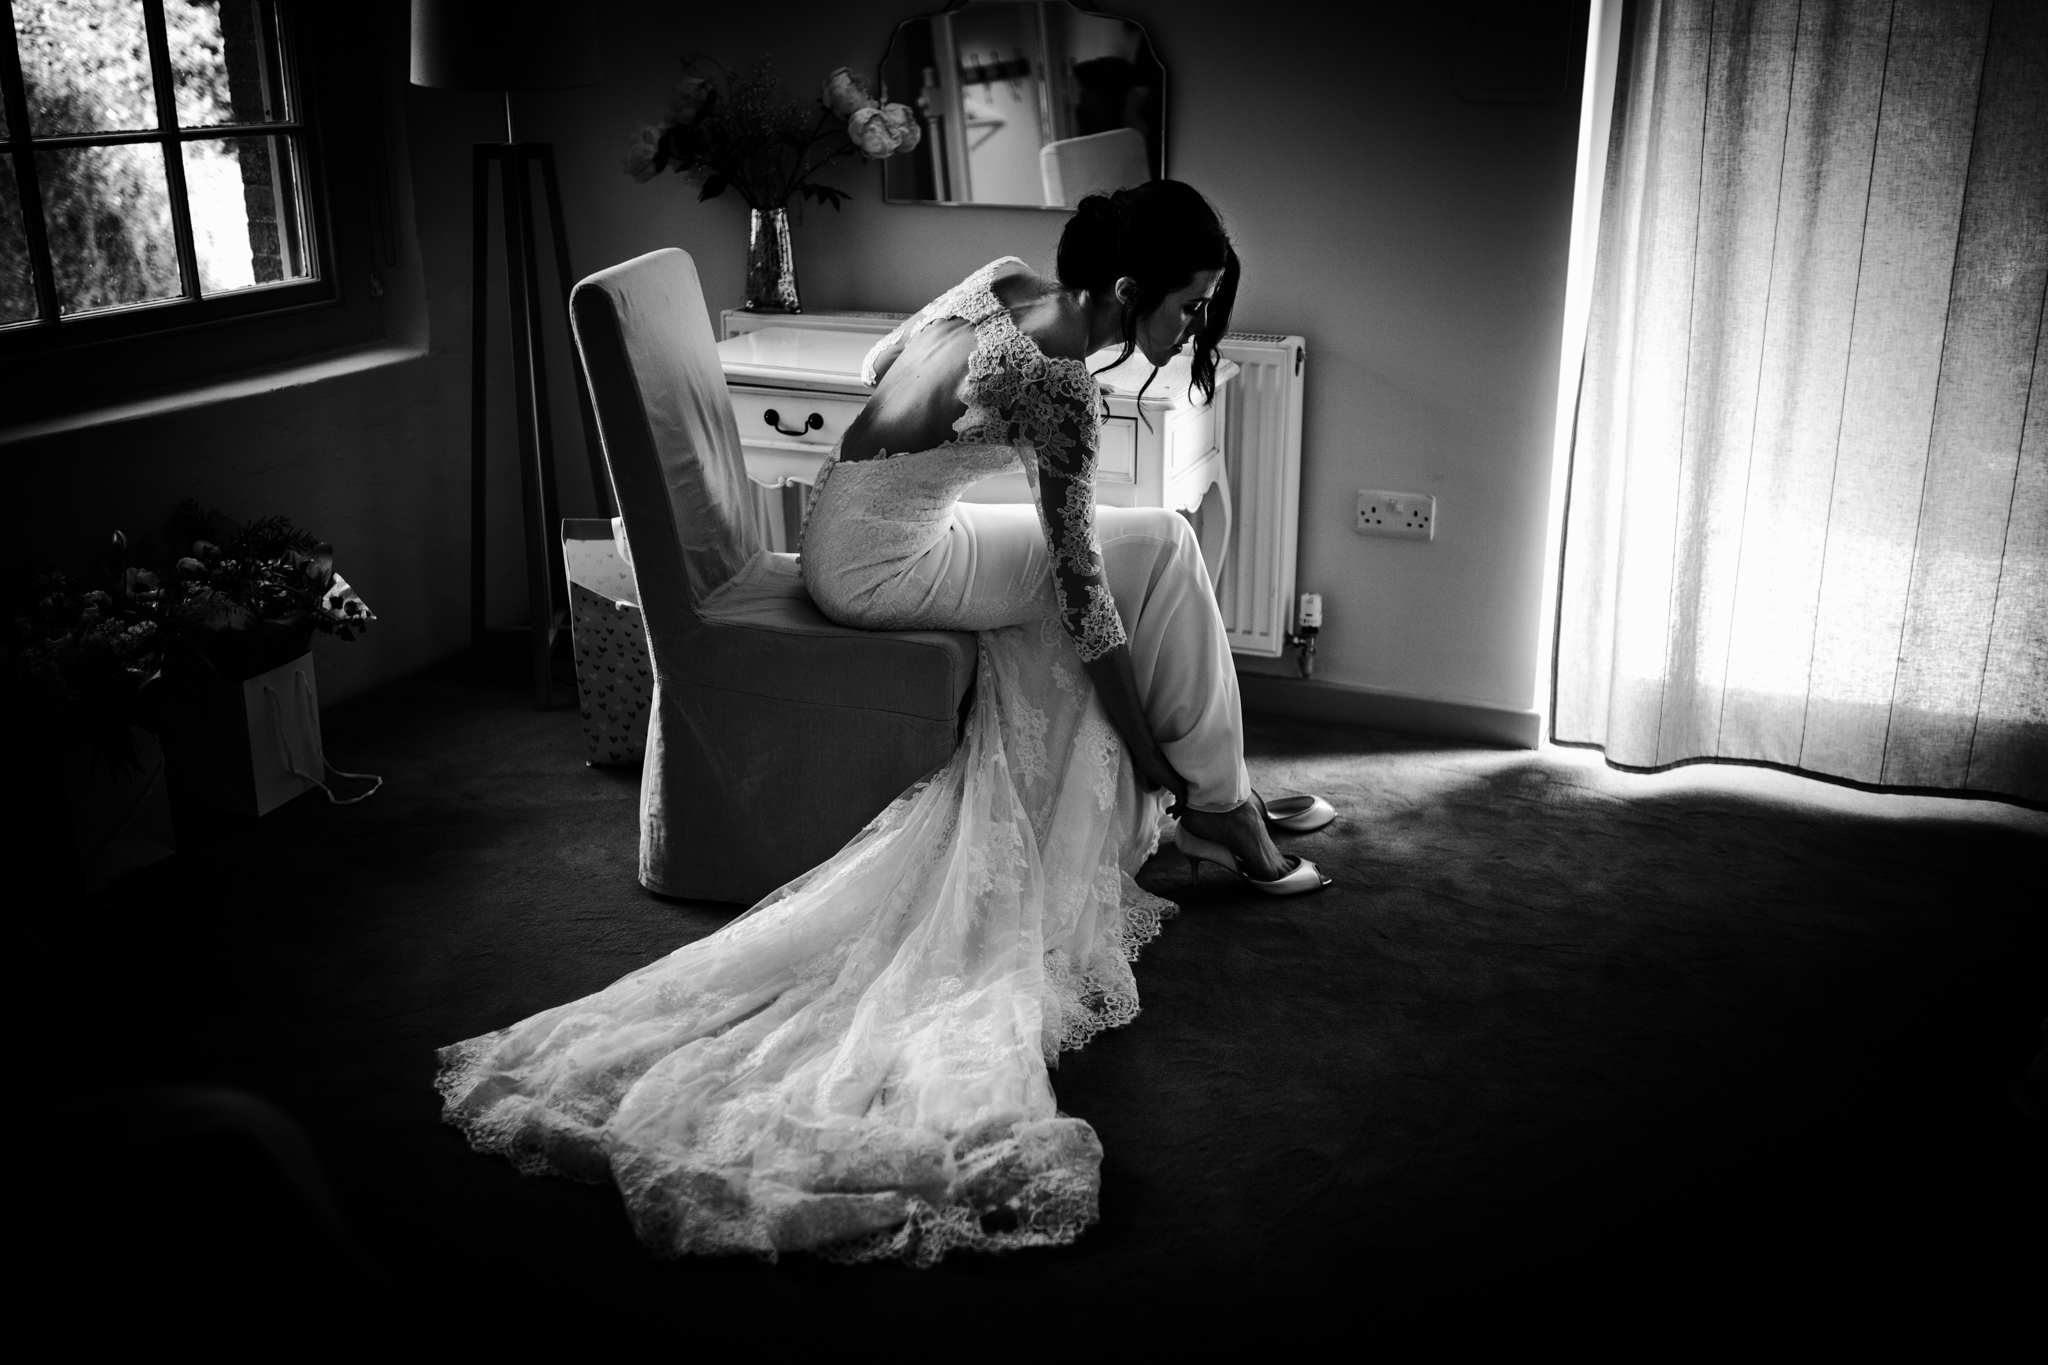 Bride putting her shoes on in a tidy hotel room